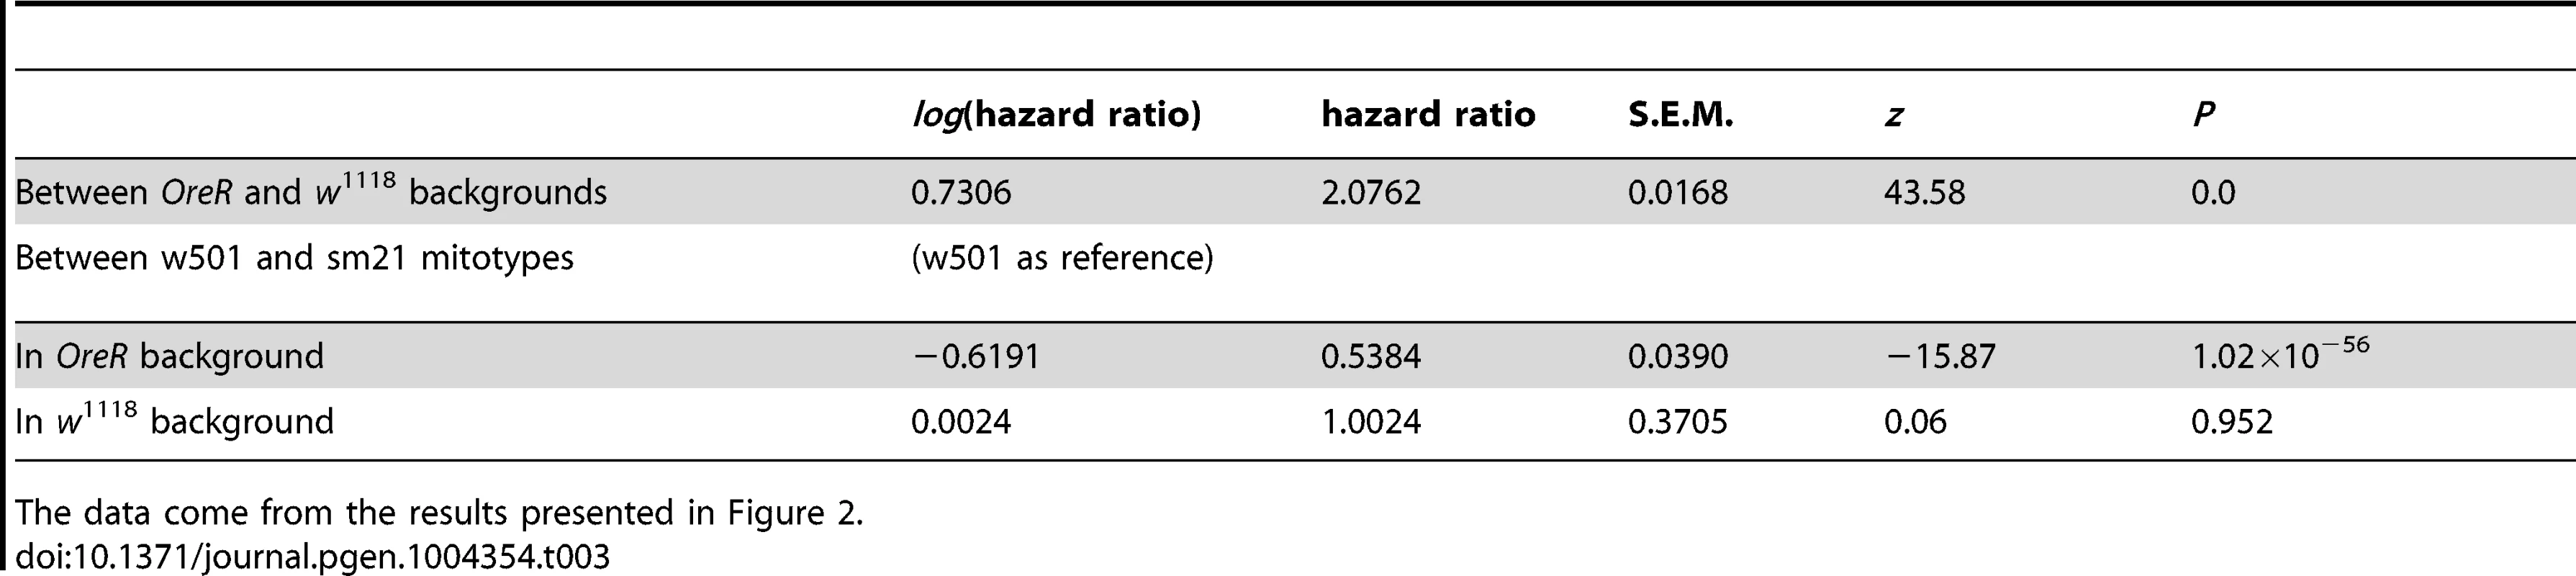 Summary of hazard ratios of background effects and w501 mitotype effects in <i>OreR</i> and <i>w</i><sup>1118</sup> nuclear backgrounds using OreR as the reference nuclear genotype.